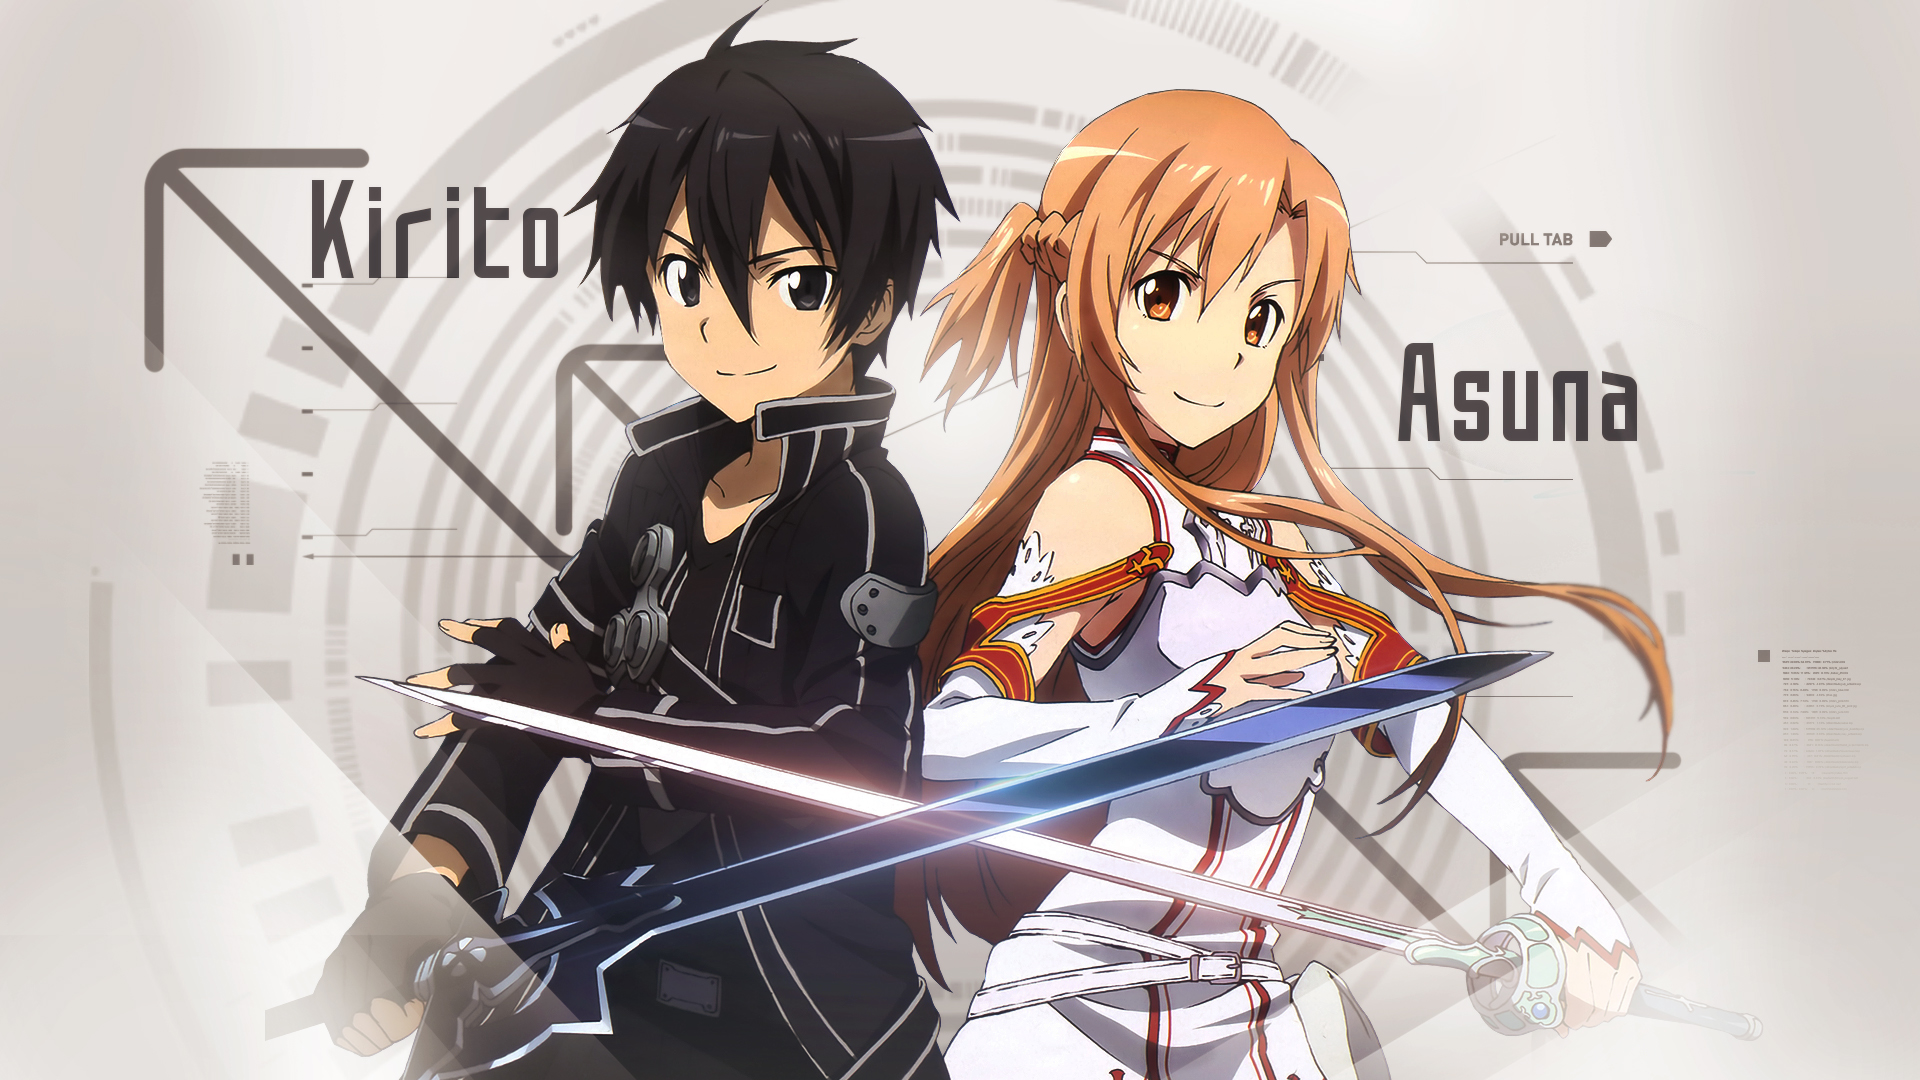 7. "Kirito and Asuna from Sword Art Online" - wide 2